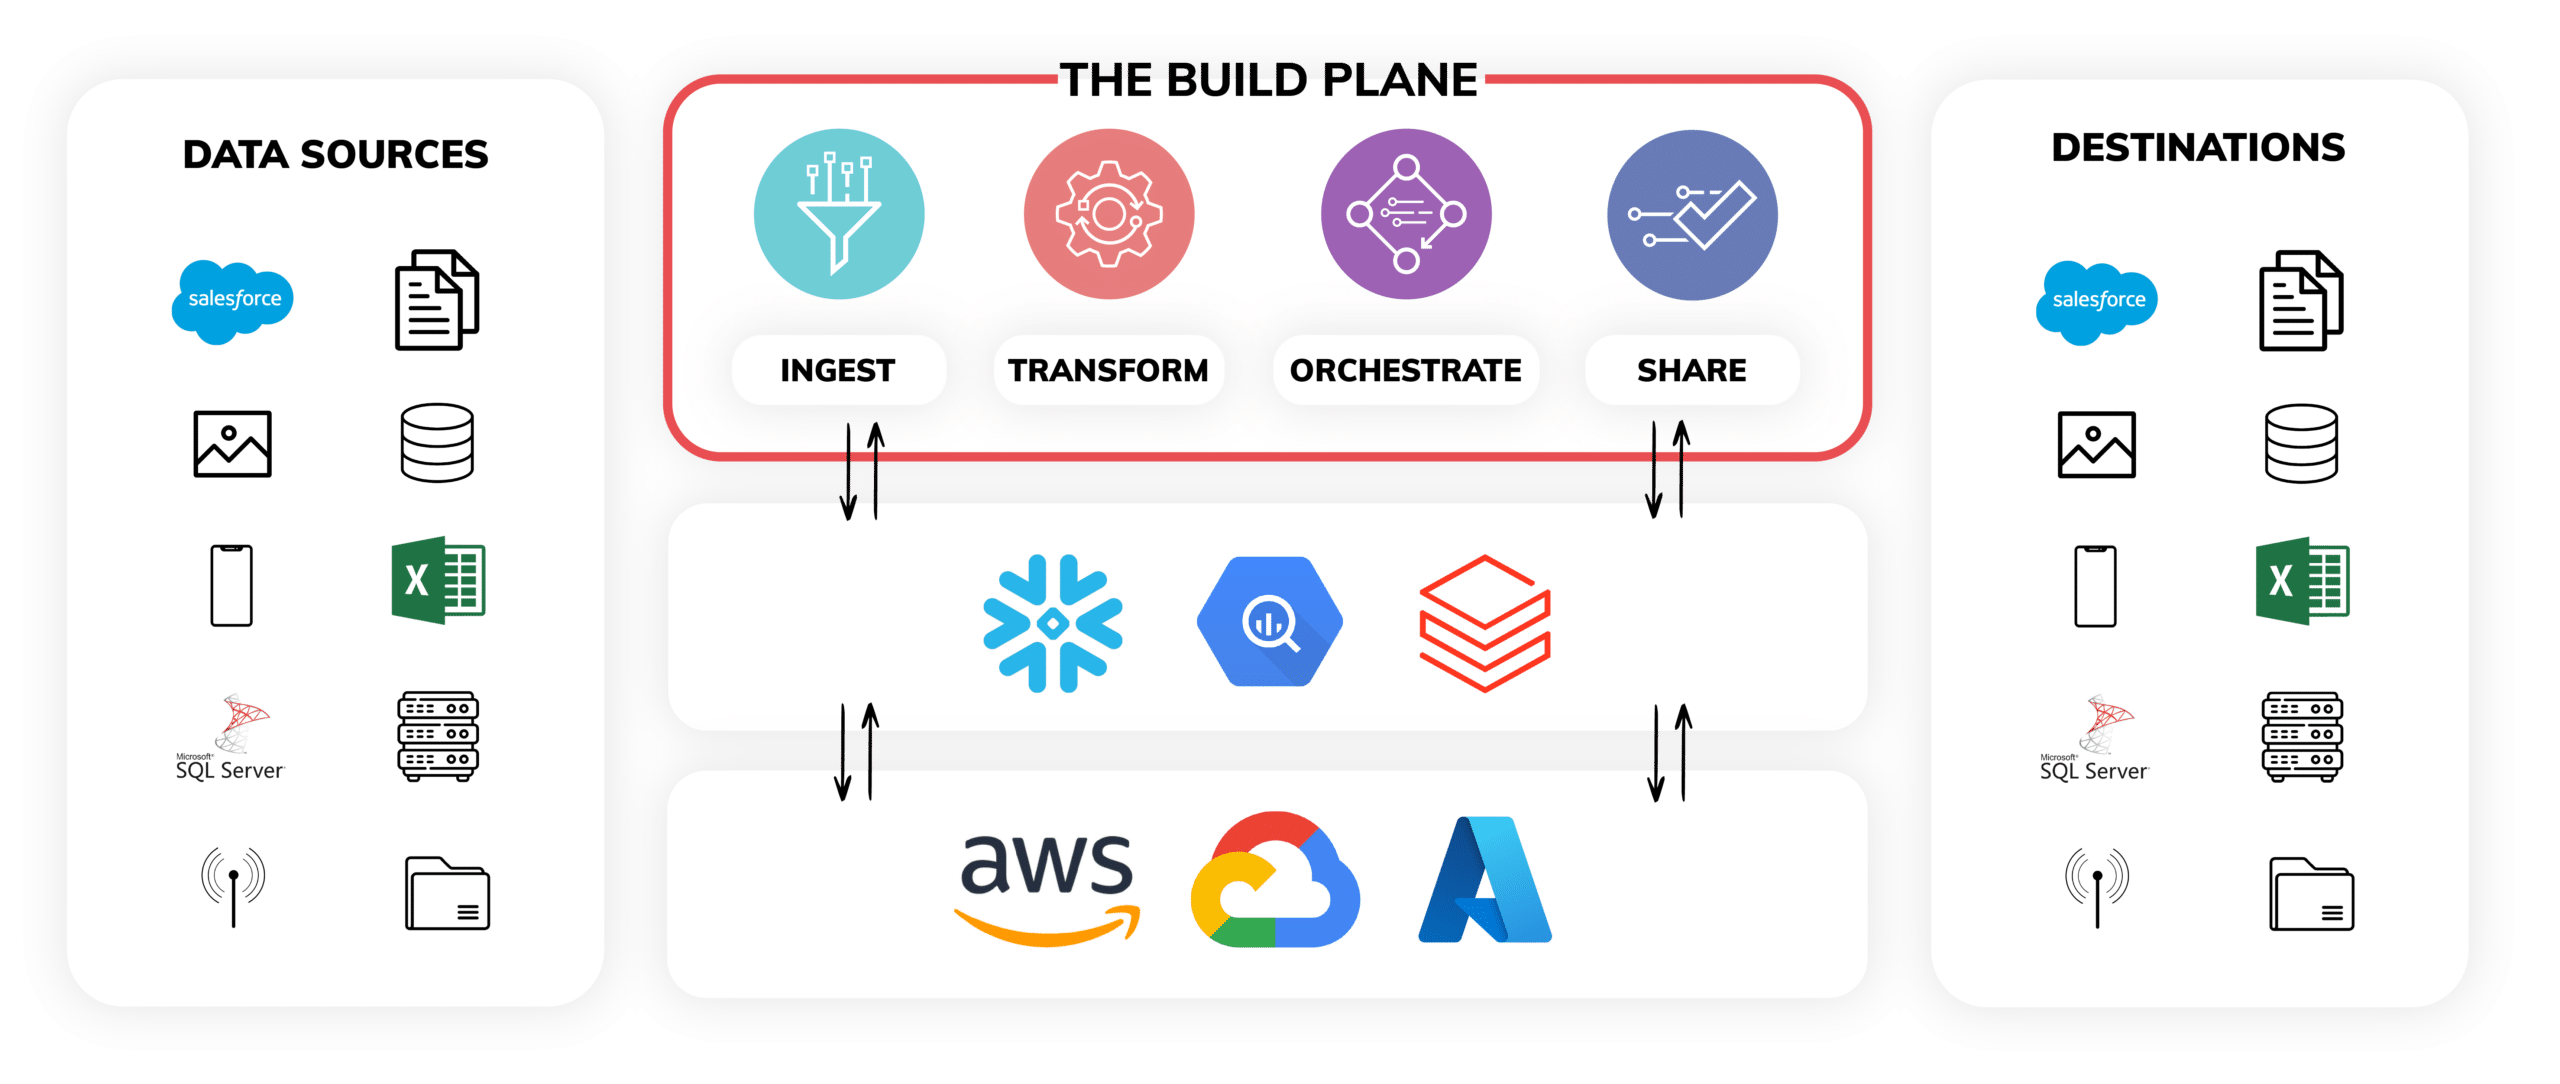 Visual representation of Ascend's build plane to ingest, transform, orchestrate, and share data by building end-to-end data pipelines.